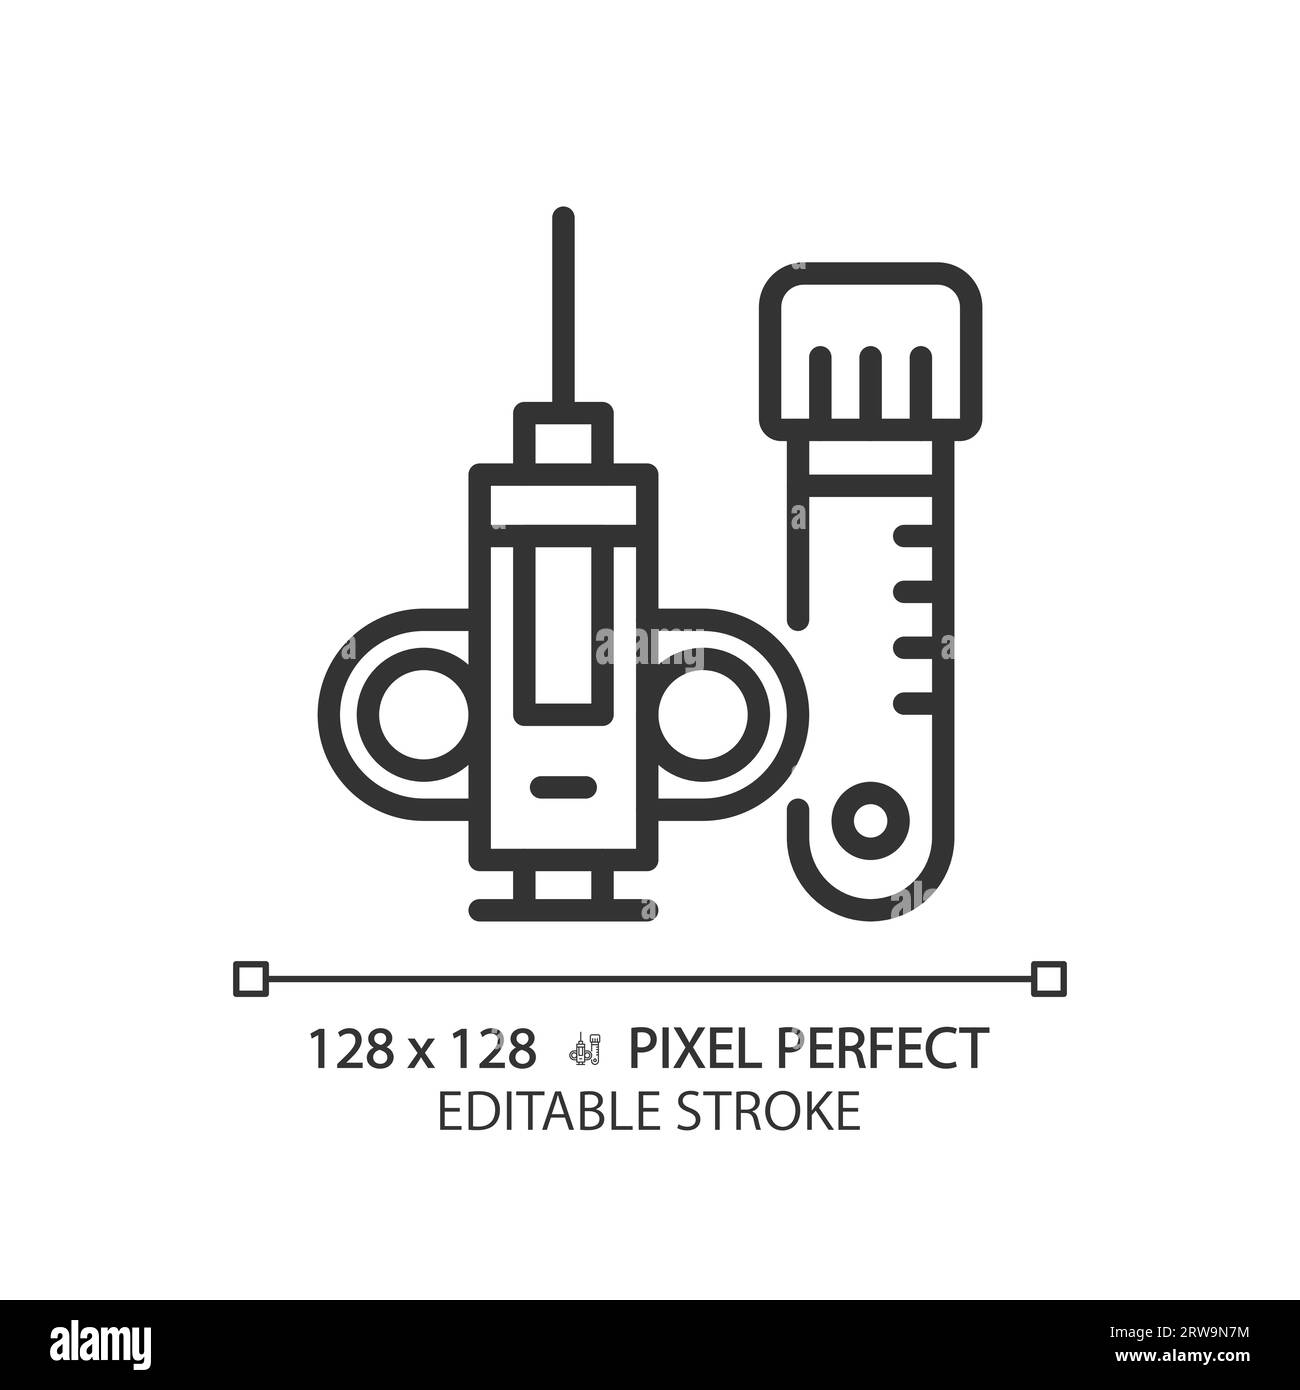 Biopsy needle pixel perfect linear icon Stock Vector